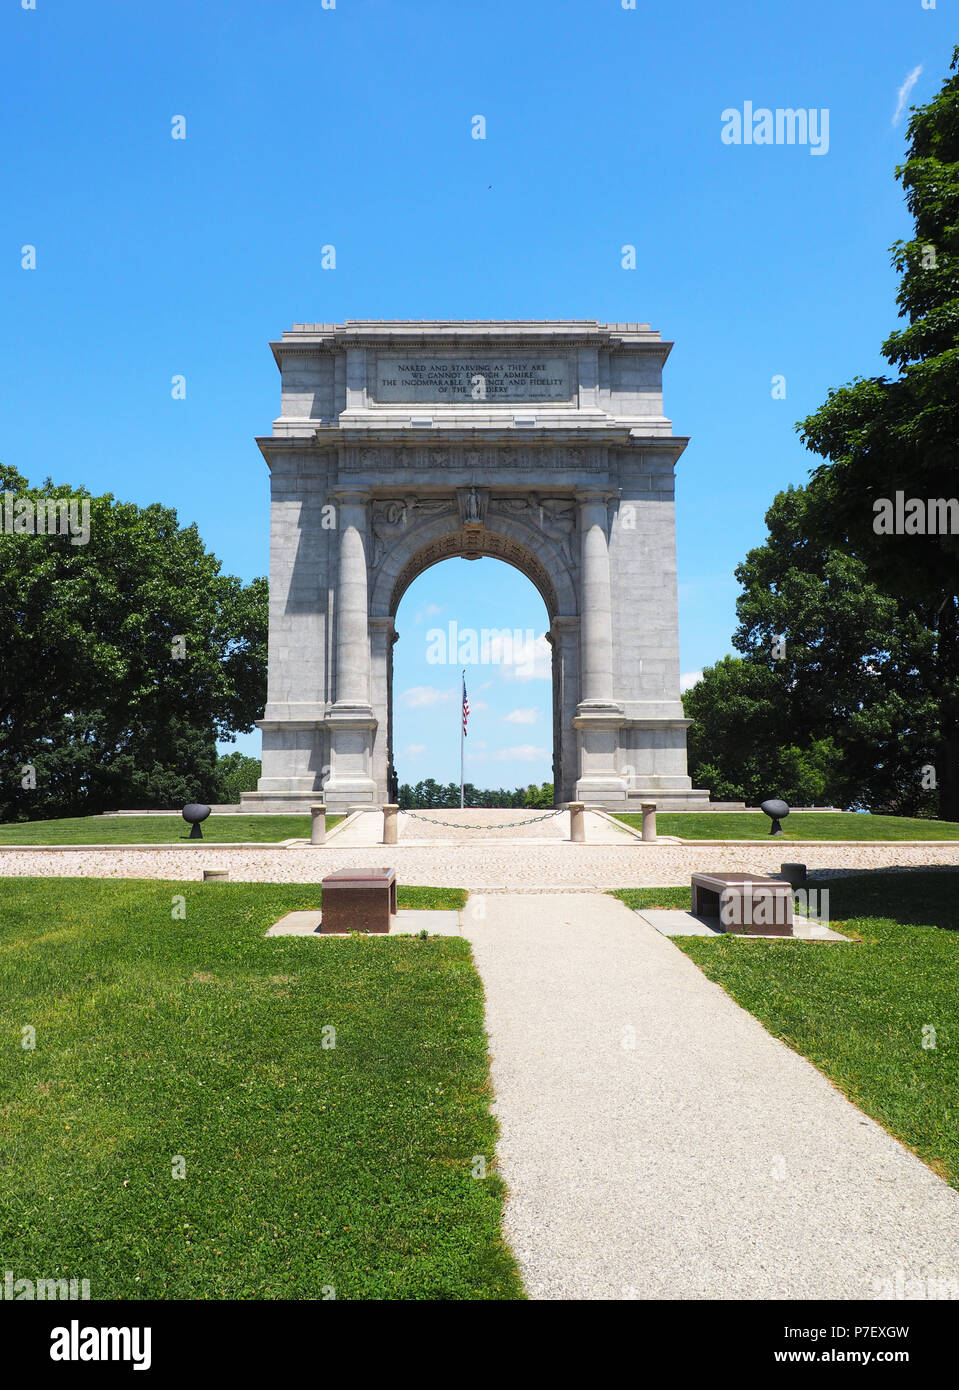 Die National Memorial Arch in Valley Forge, Pennsylvania Stockfoto